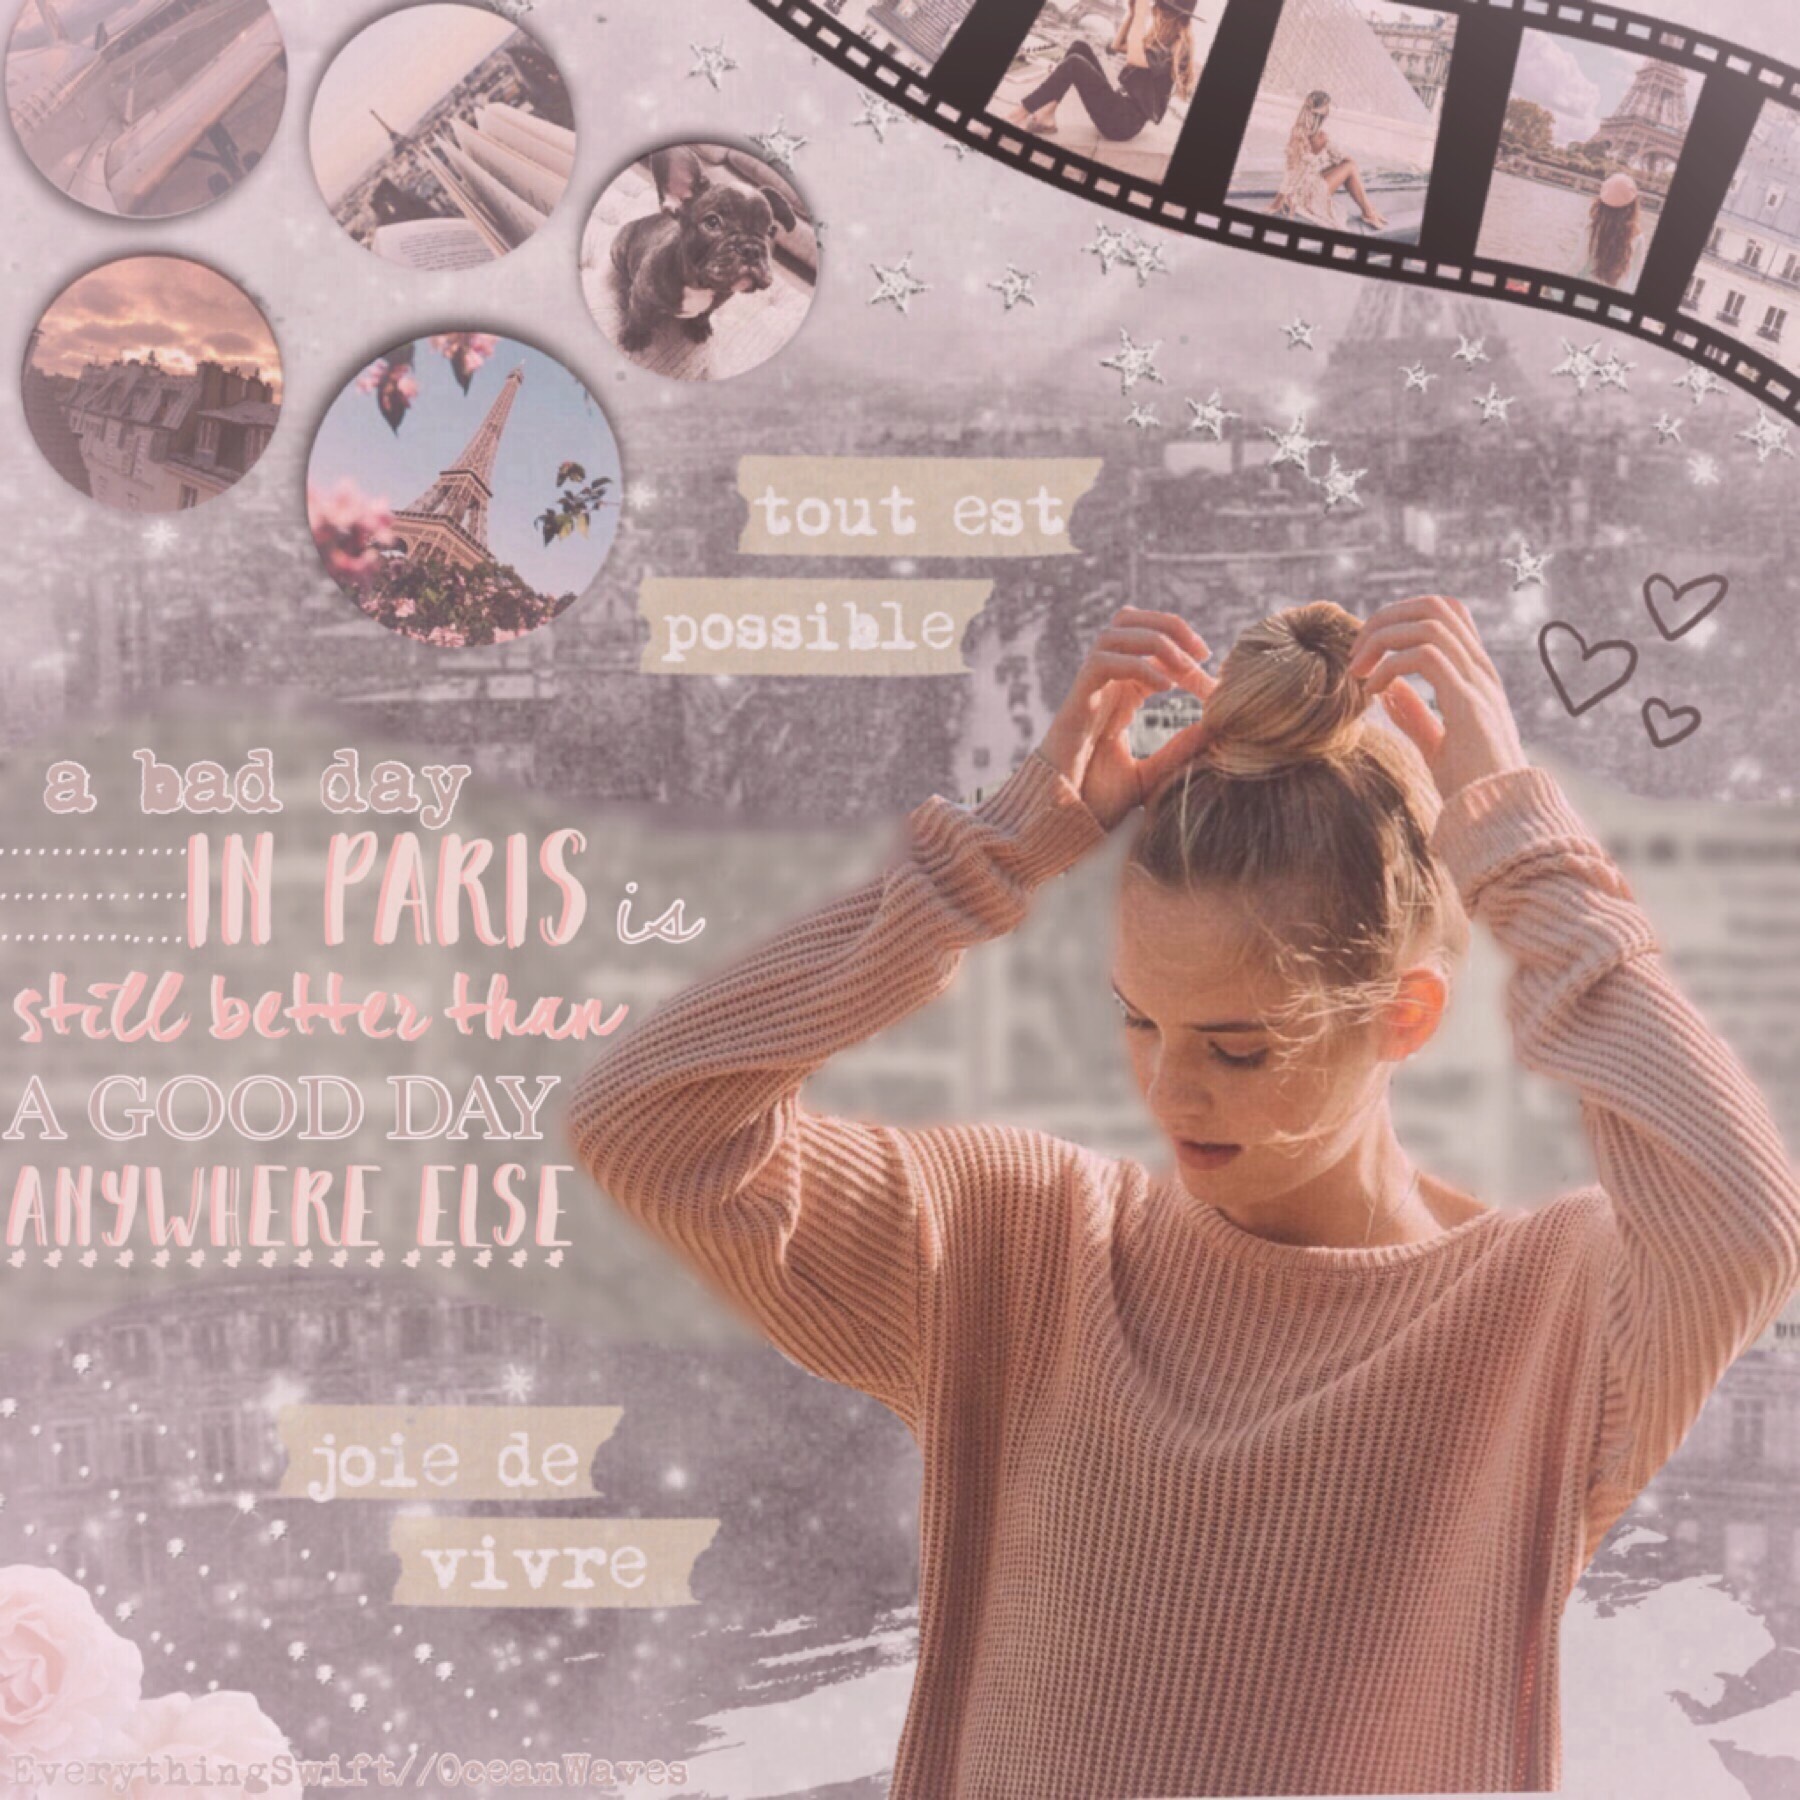 ✰ t a p  f o r  c o l l a b ✰
collab with the freaking incredible -OceanWaves-
I tried something new with bg and I really like it
bg is inspired by meandmeonly, blossomed-, etc.
qotd: what language do u wish u knew?
aotd: French, German, or Hawaiian (: